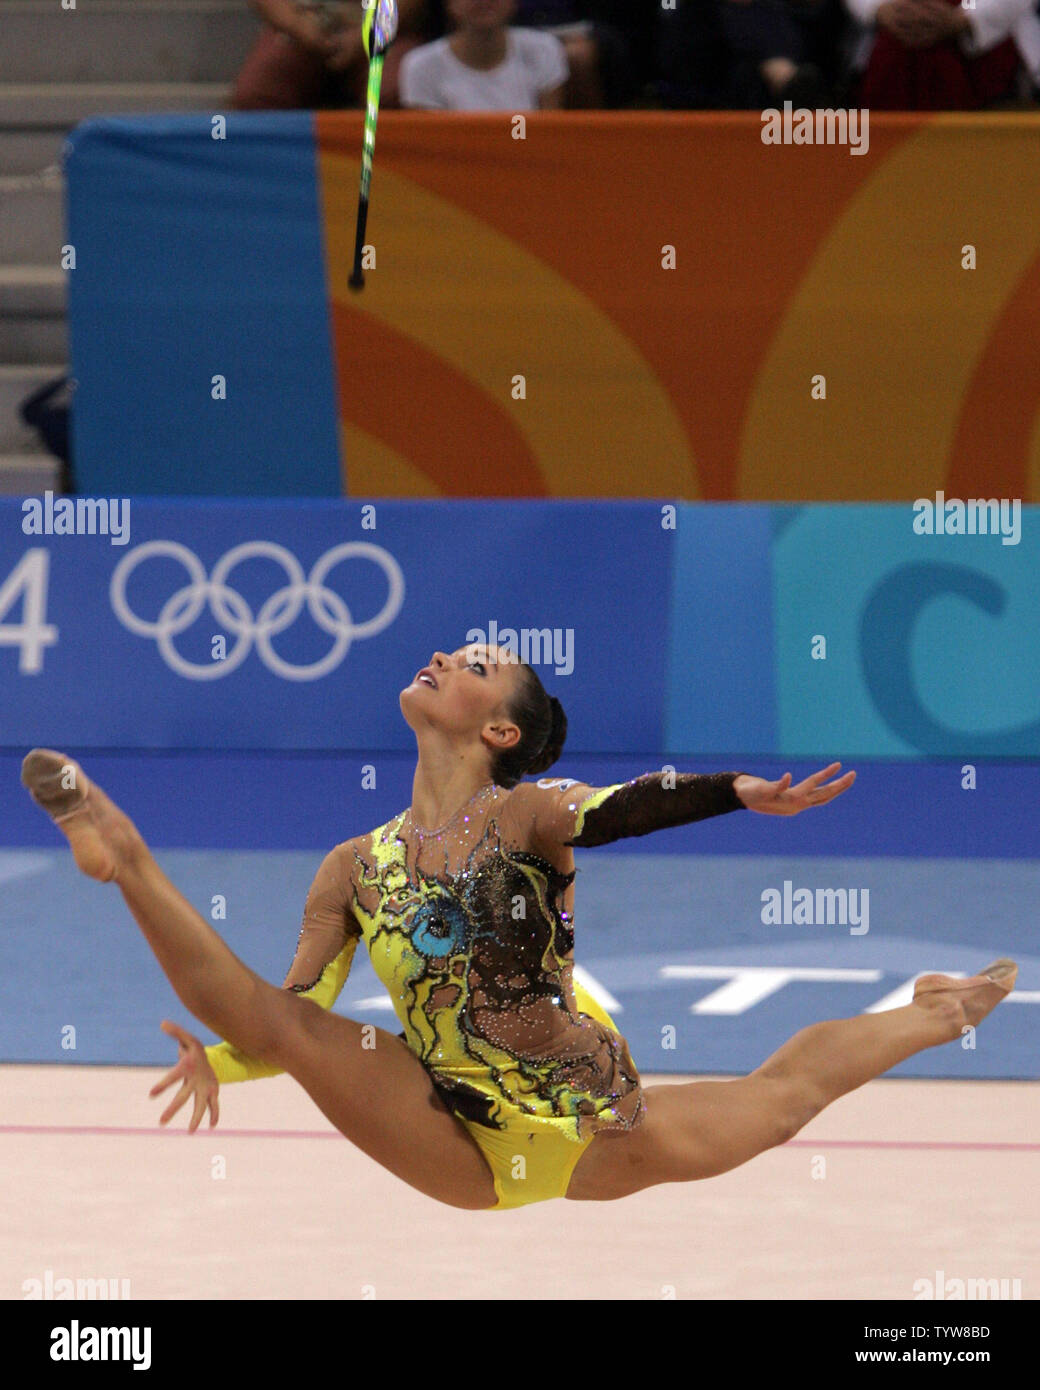 Russia's Alina Kabaeva performs her clubs routine in the rhythmic gymnastics individual all around final at the Athens Galatsi Hall in Athens on August 29, 2004. Kabaeva finished the four-apparatus event with a total of 108.400 points to win the gold medal.  (UPI Photo/Grace Chiu) Stock Photo